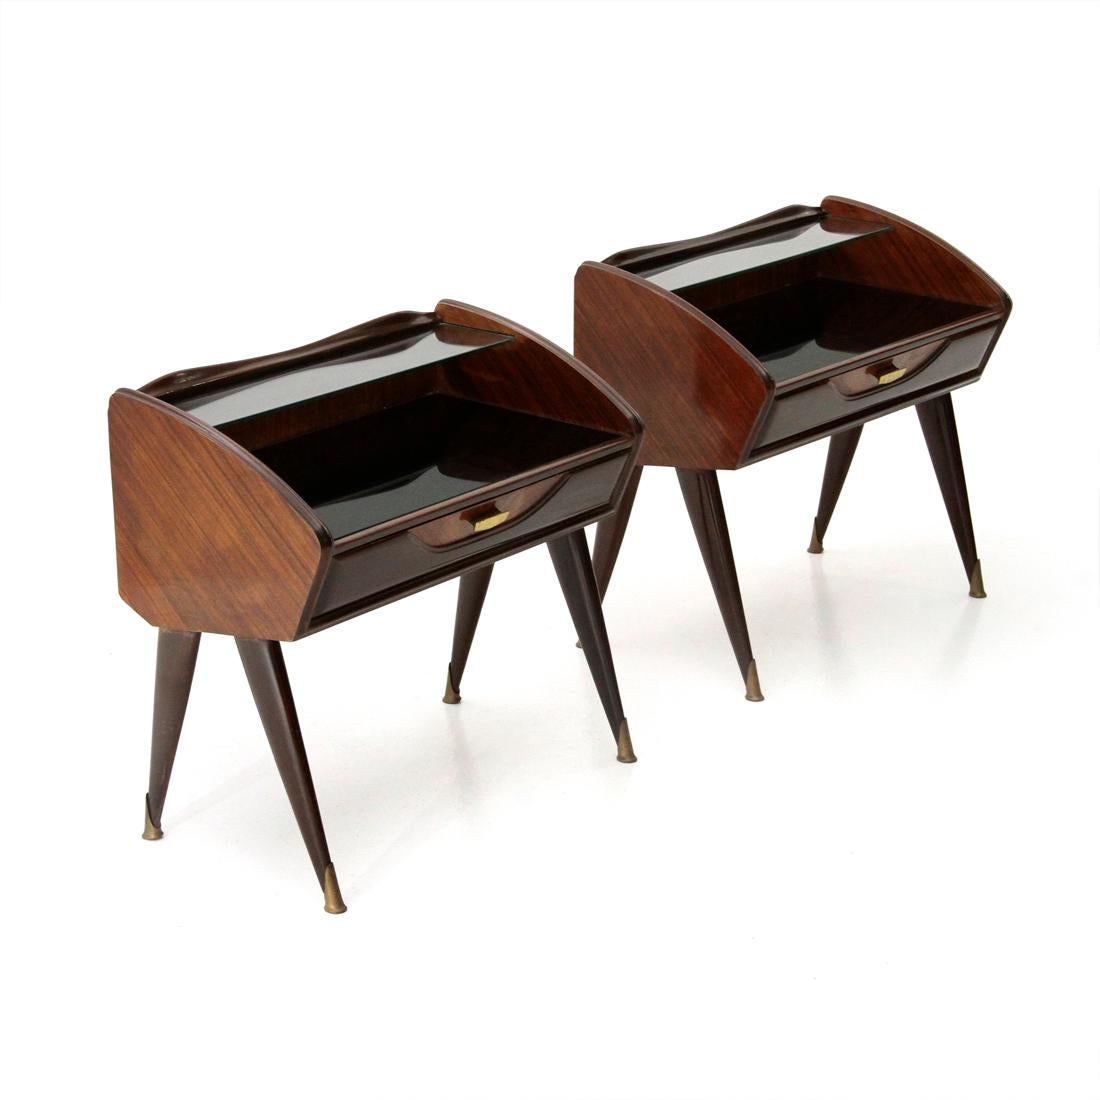 Pair of Italian-made bedside tables produced in the 1950s.
Structure in veneered wood.
Front drawer with brass handle.
Black glass top and transparent glass shelf.
Wooden legs with final tapering.
Brass tips.
Good general conditions, some